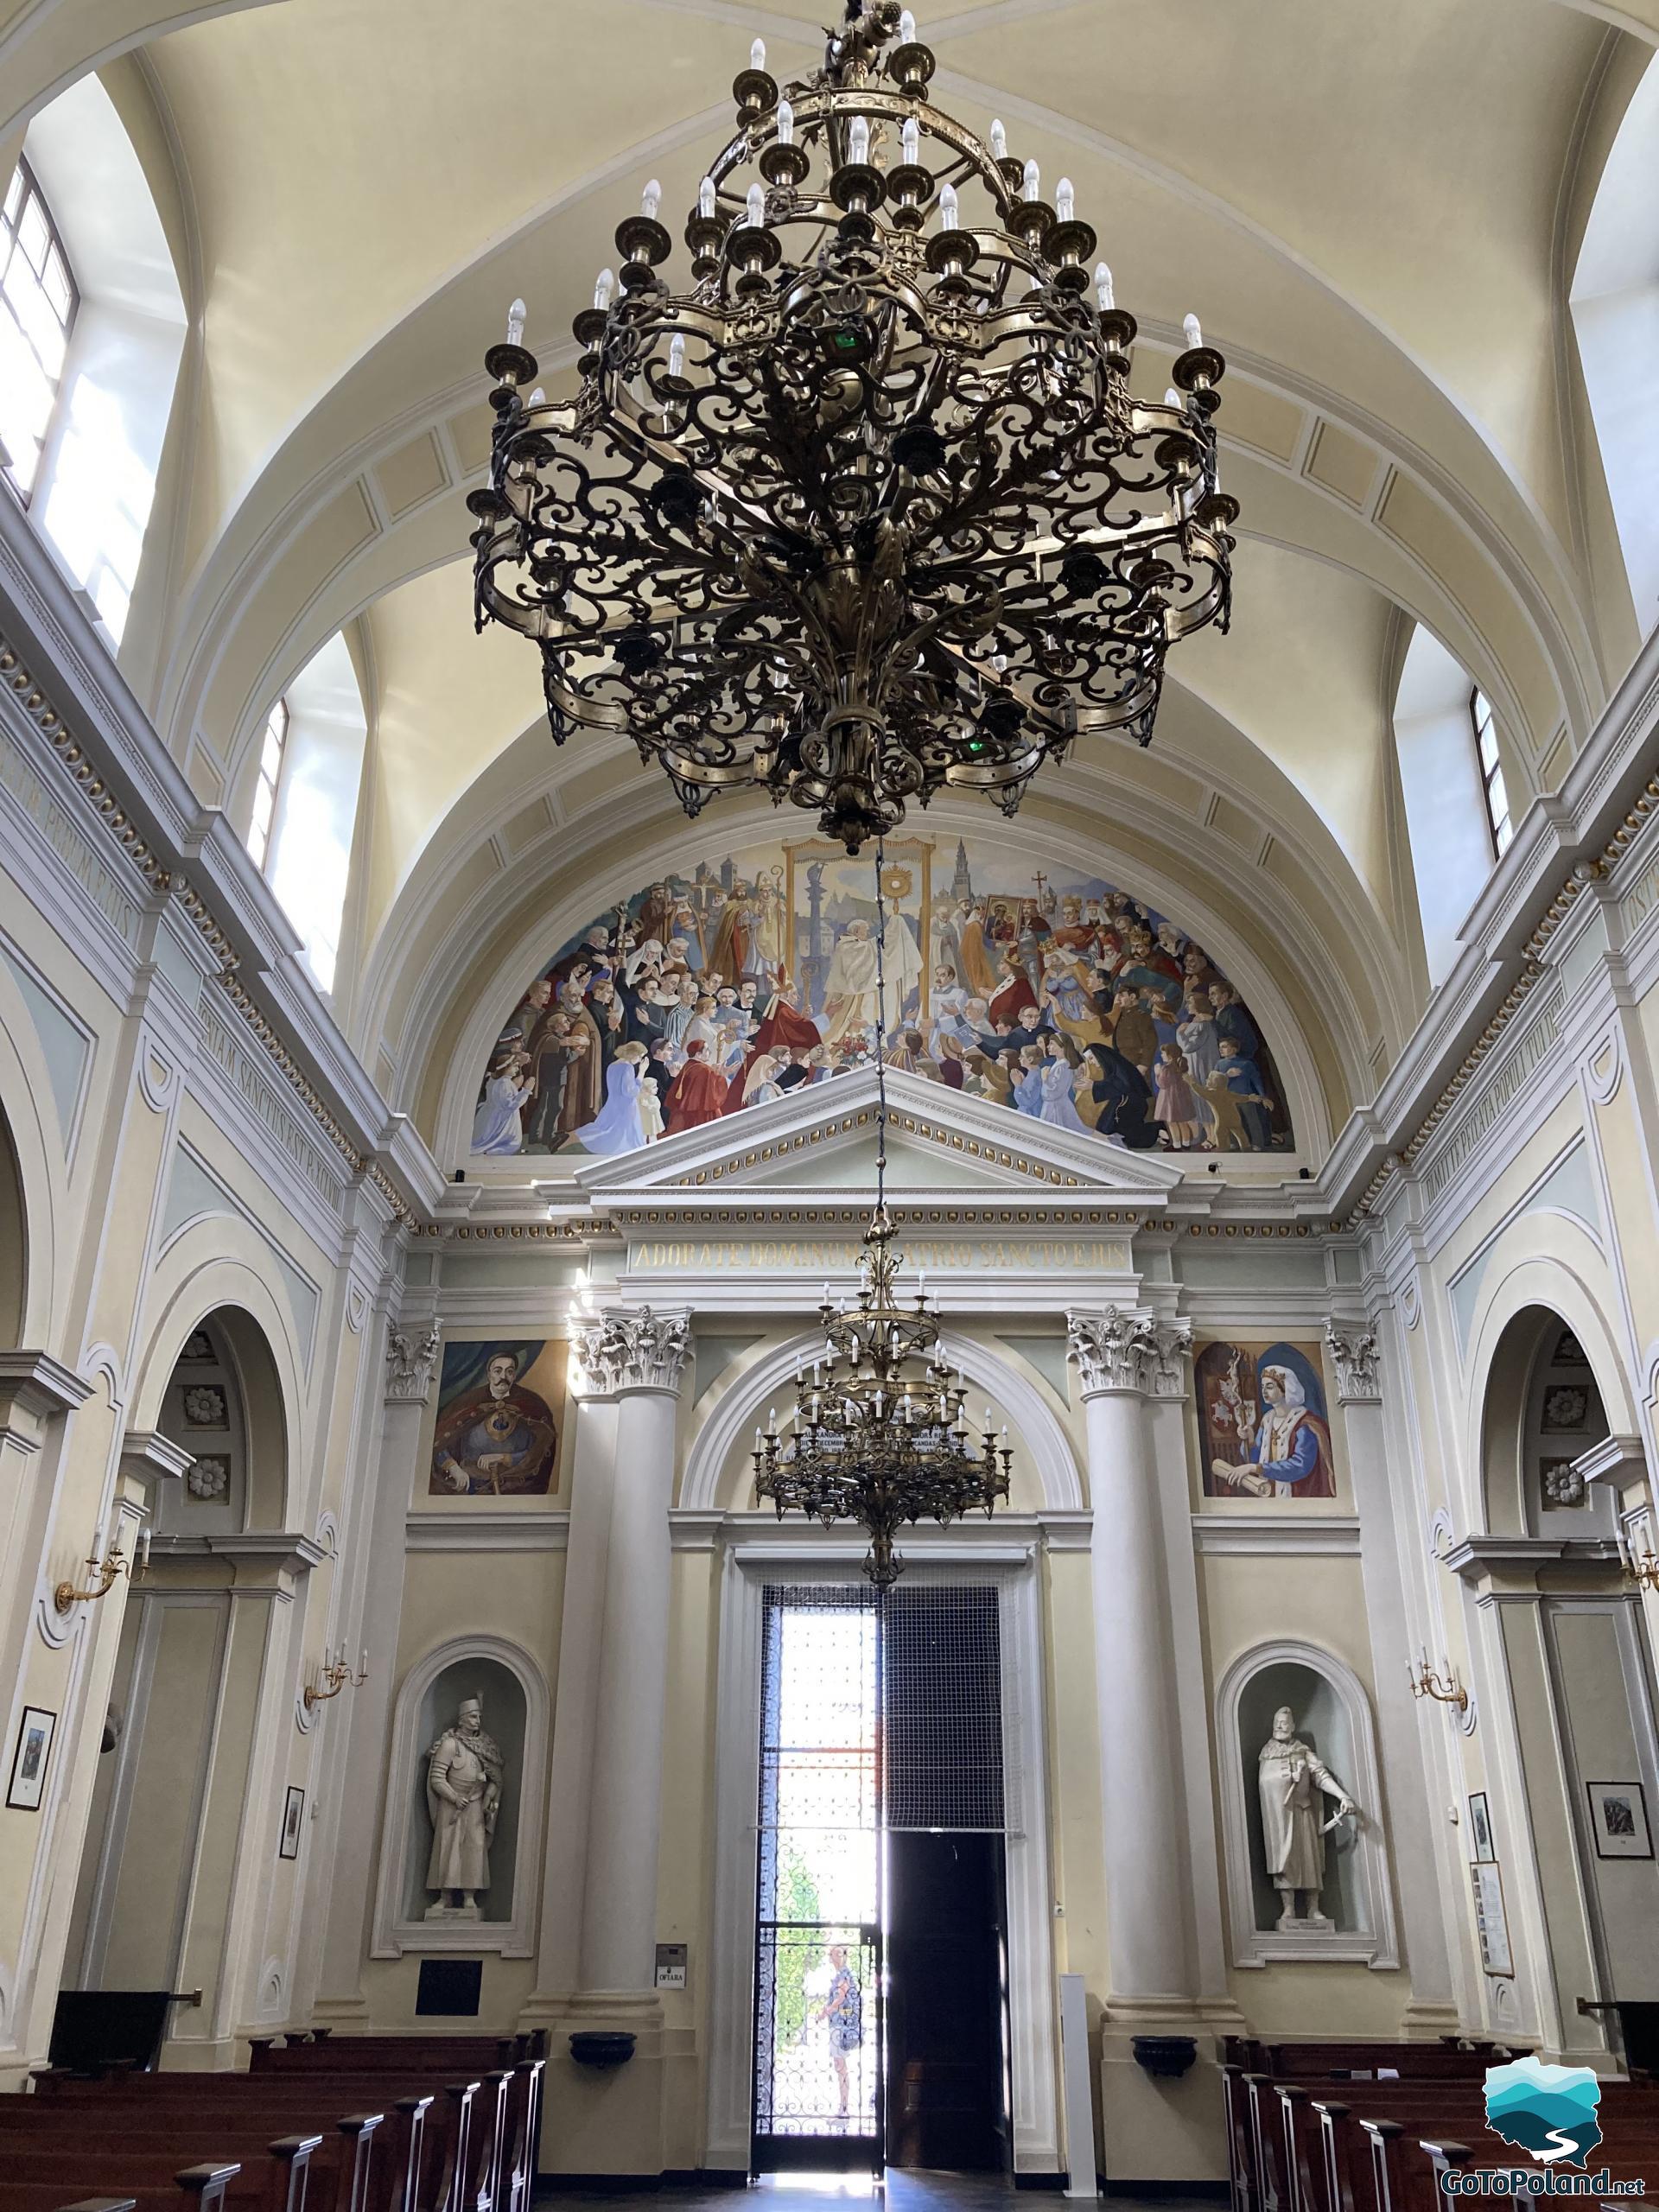 the main entrance to the church seeing from the inside, a large chandelier hangs from the ceiling, there are two statues on either side of the entrance